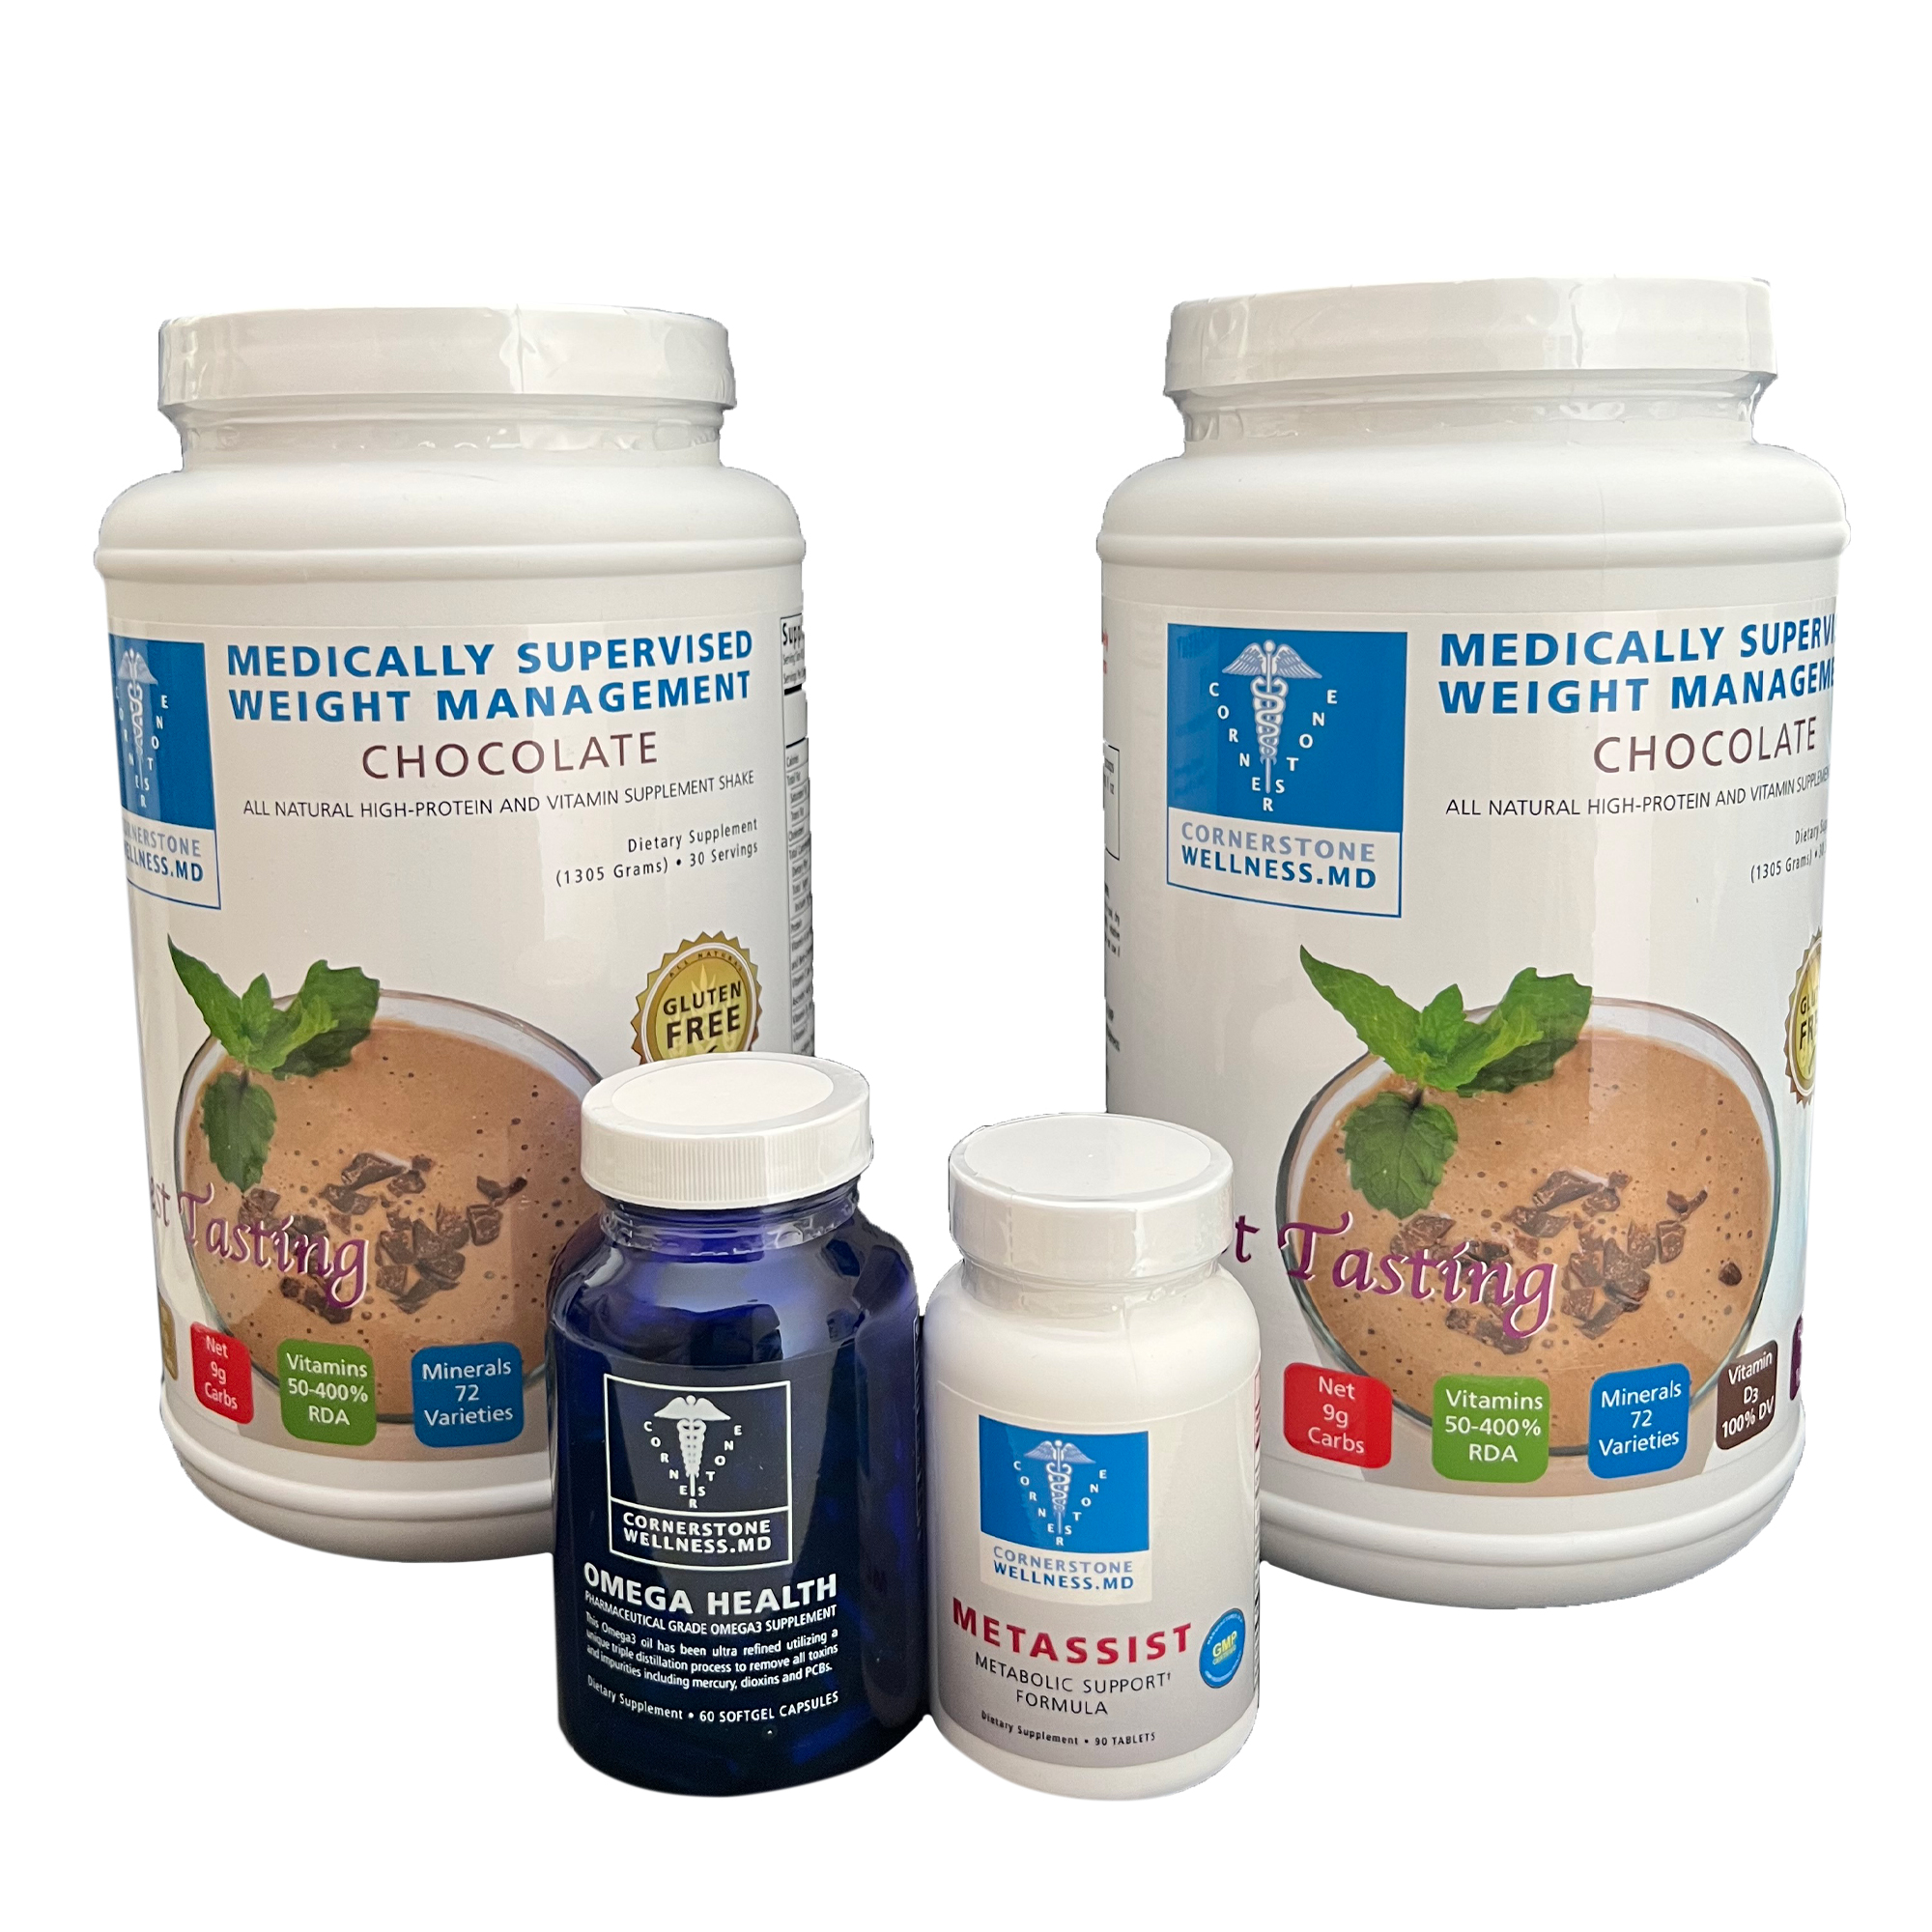 Get 15% of Cornerstone Wellness products online